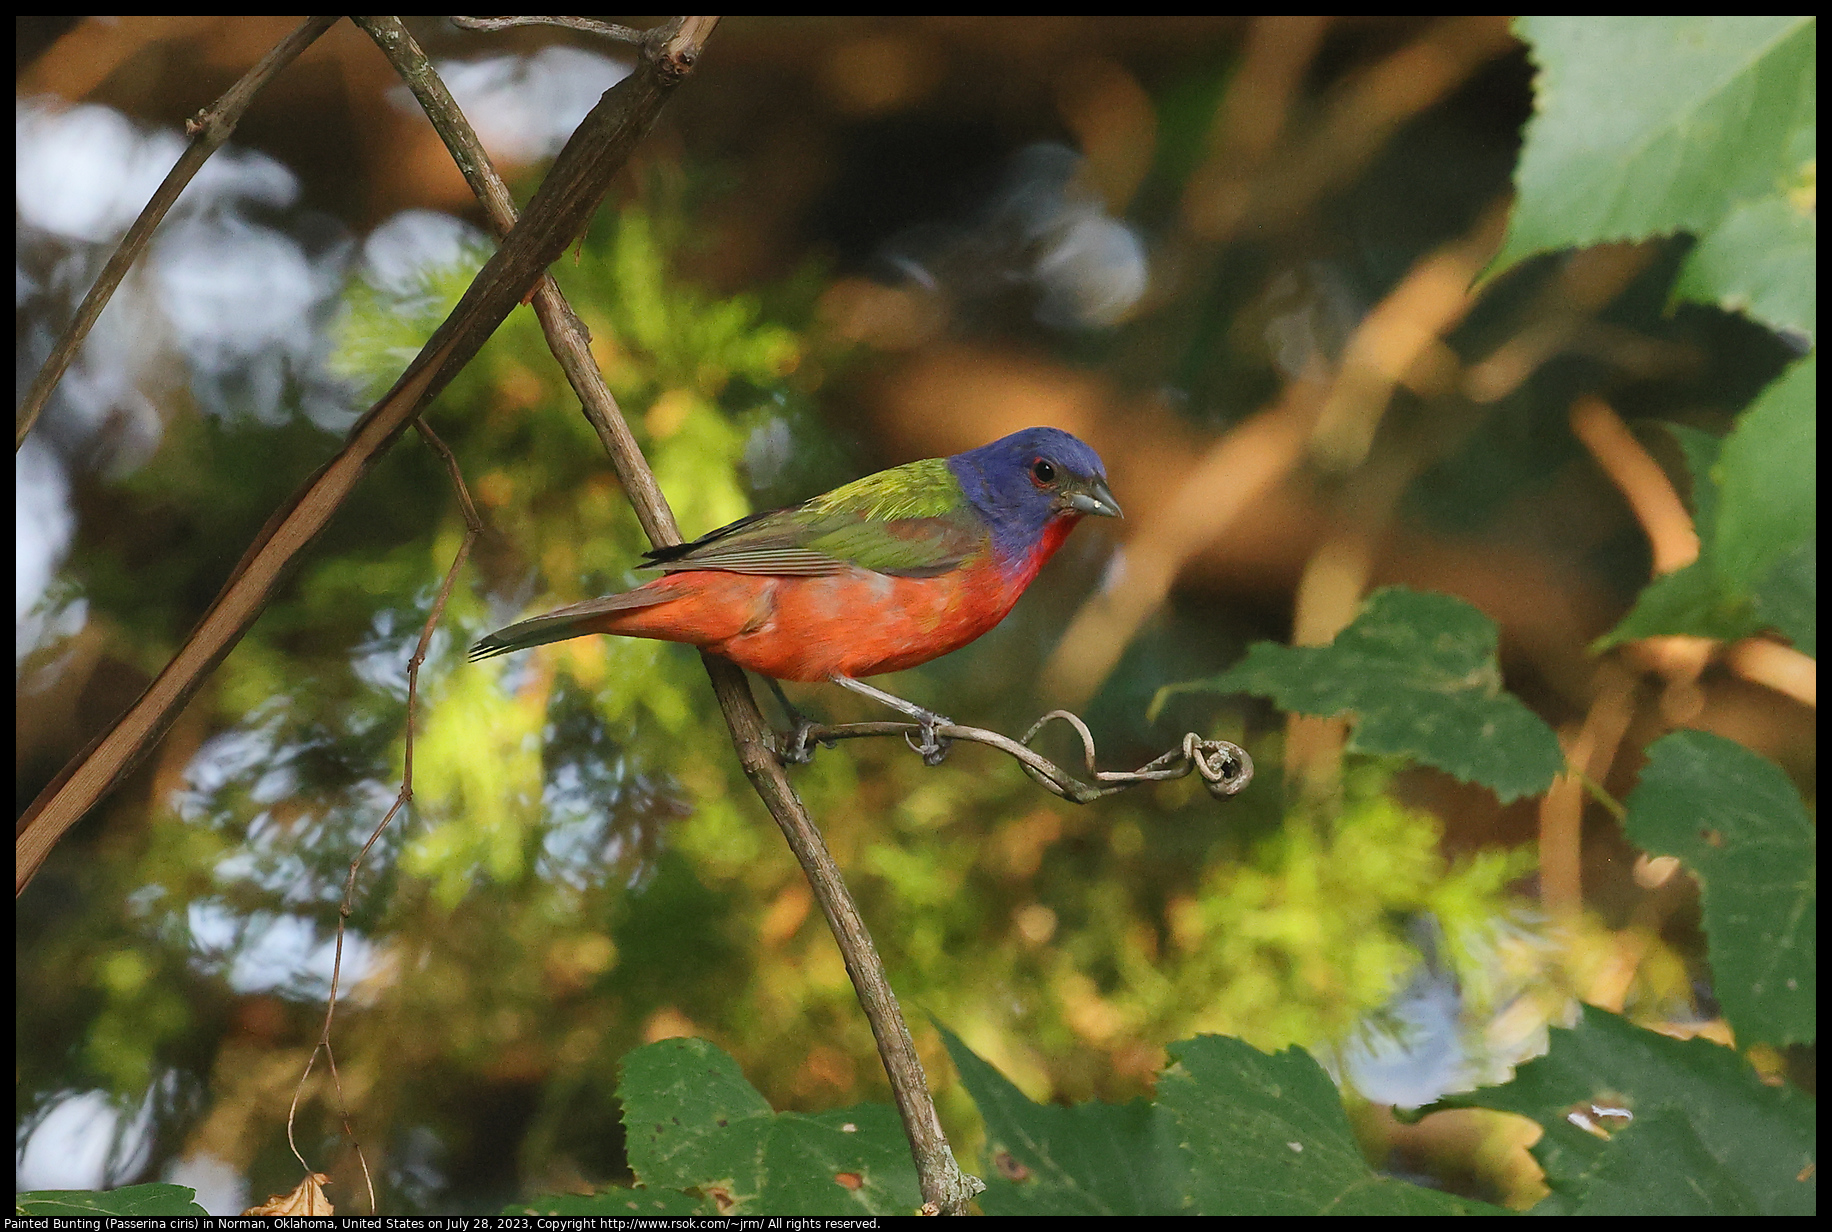 Painted Bunting (Passerina ciris) in Norman, Oklahoma, United States on July 28, 2023